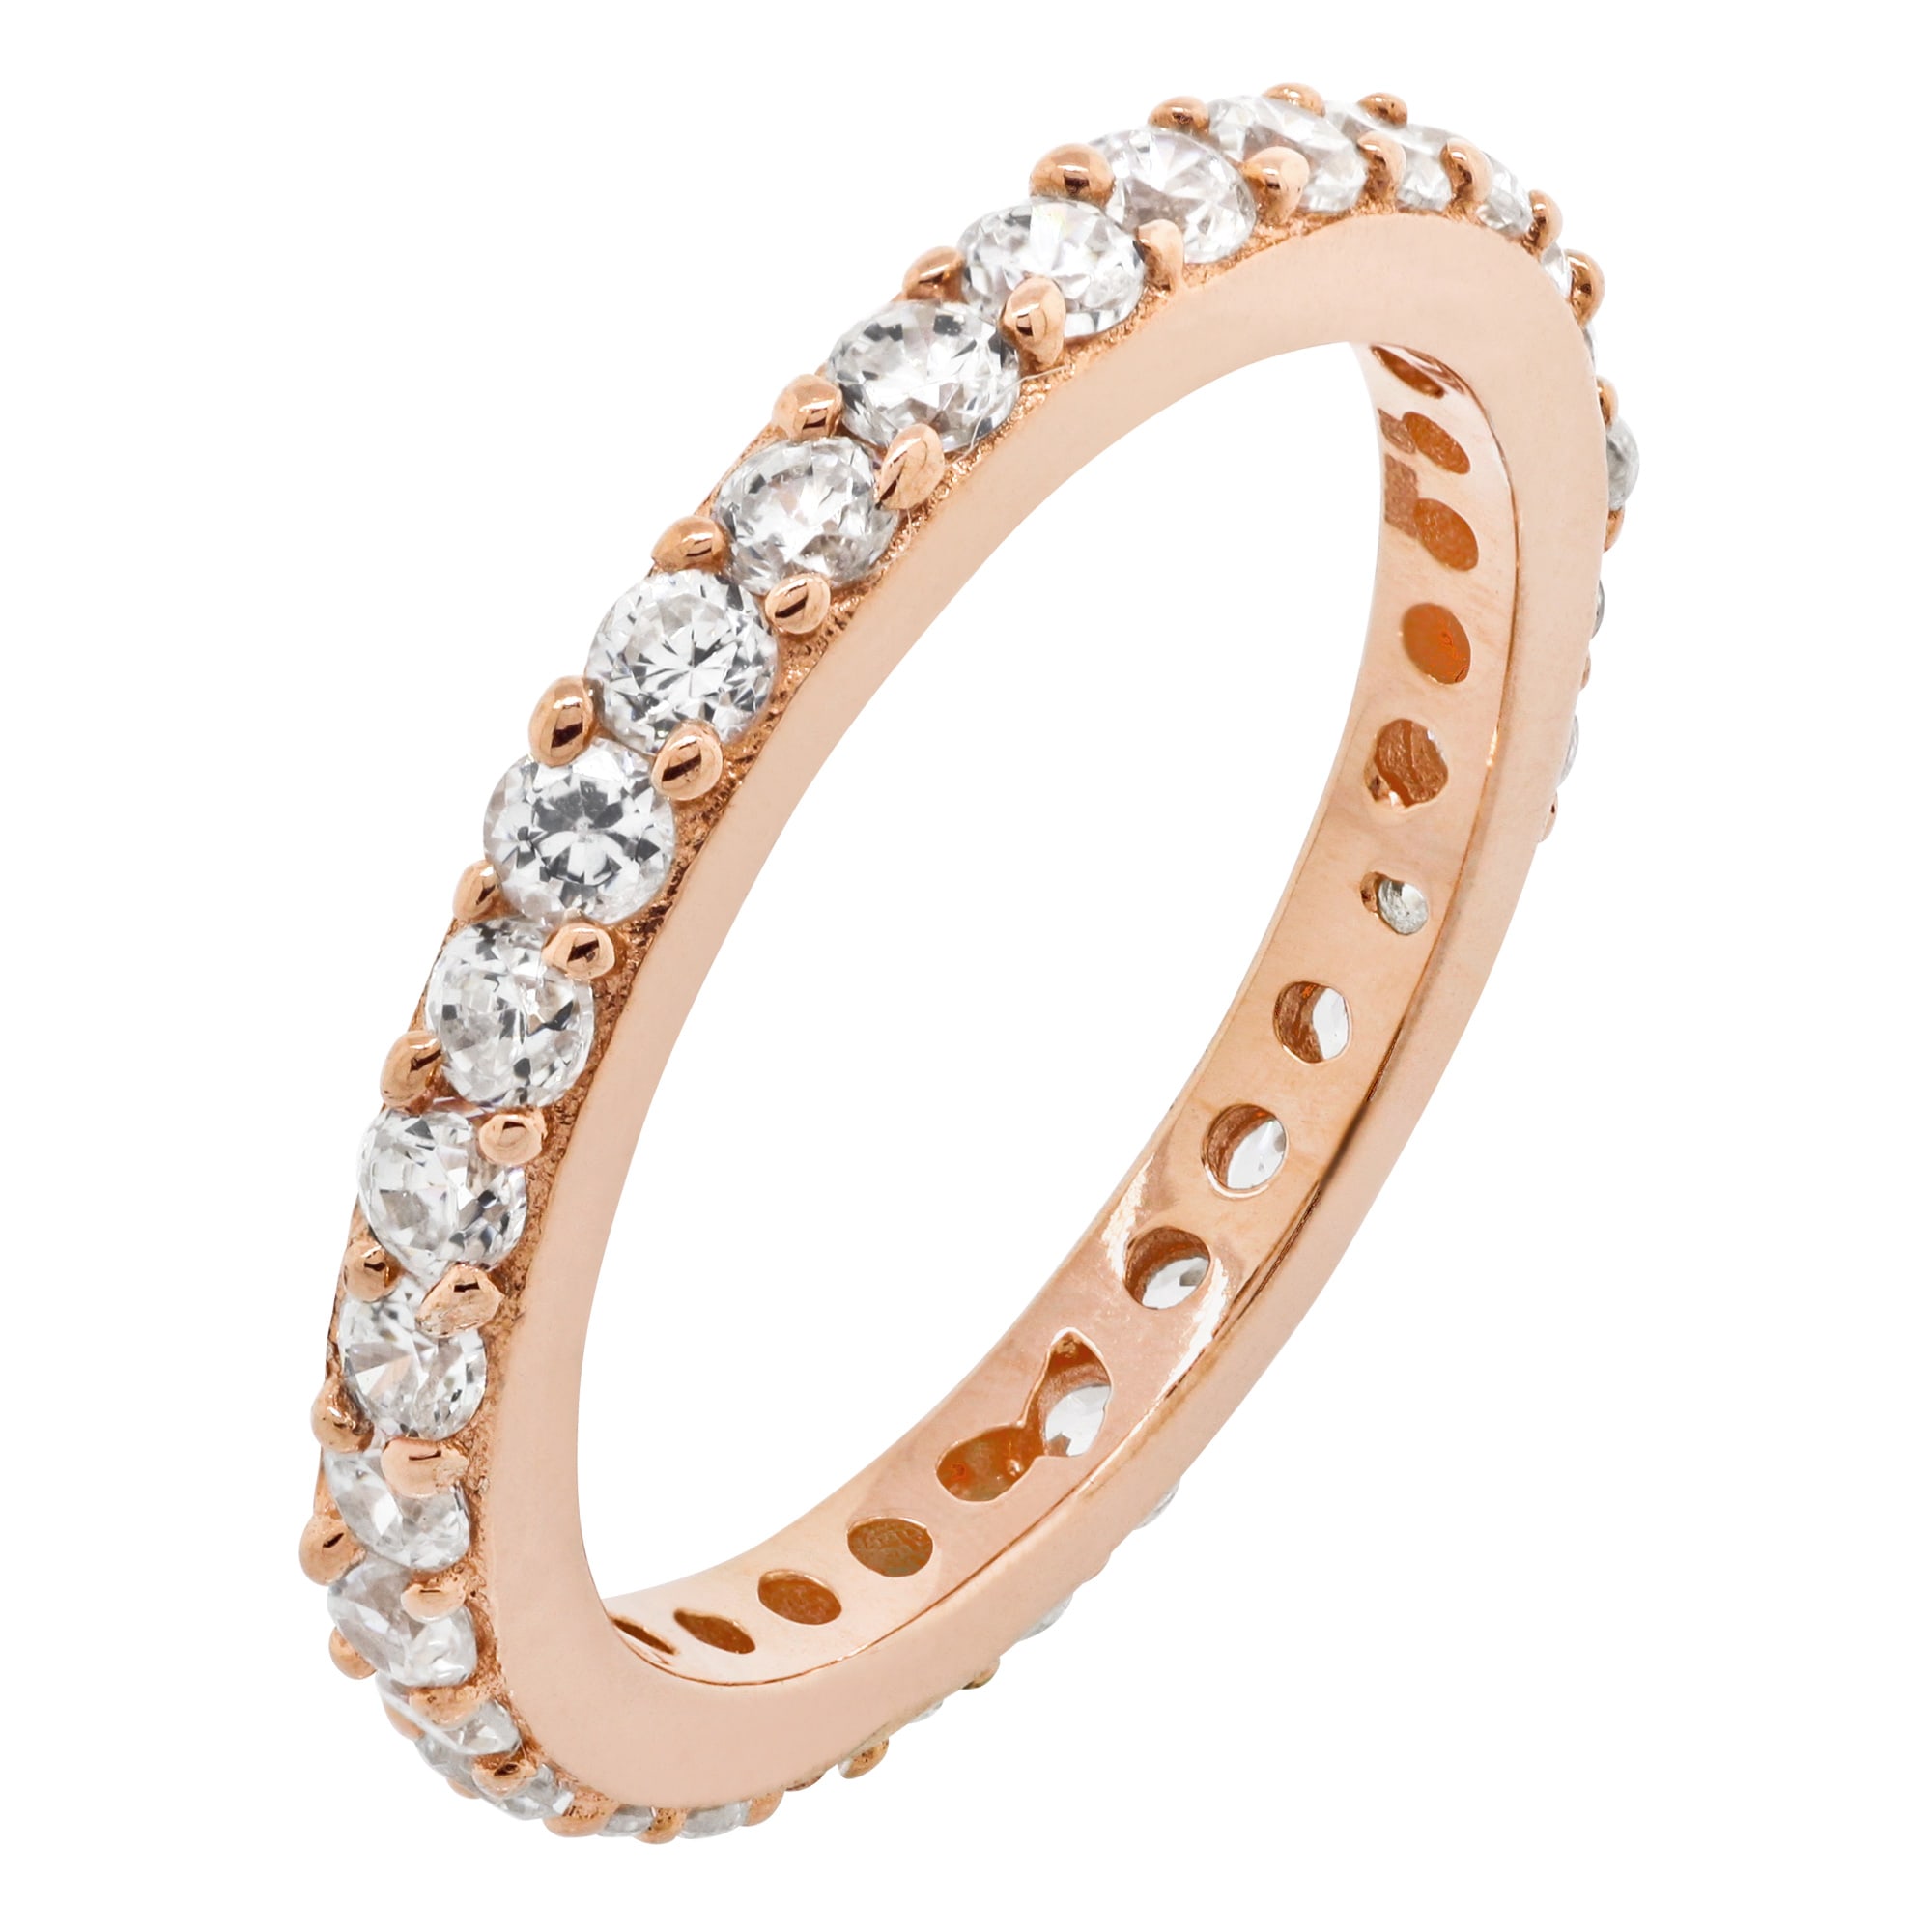 How to Clean Rose Gold Jewelry: Everything You Need To Know - Diamond Nexus